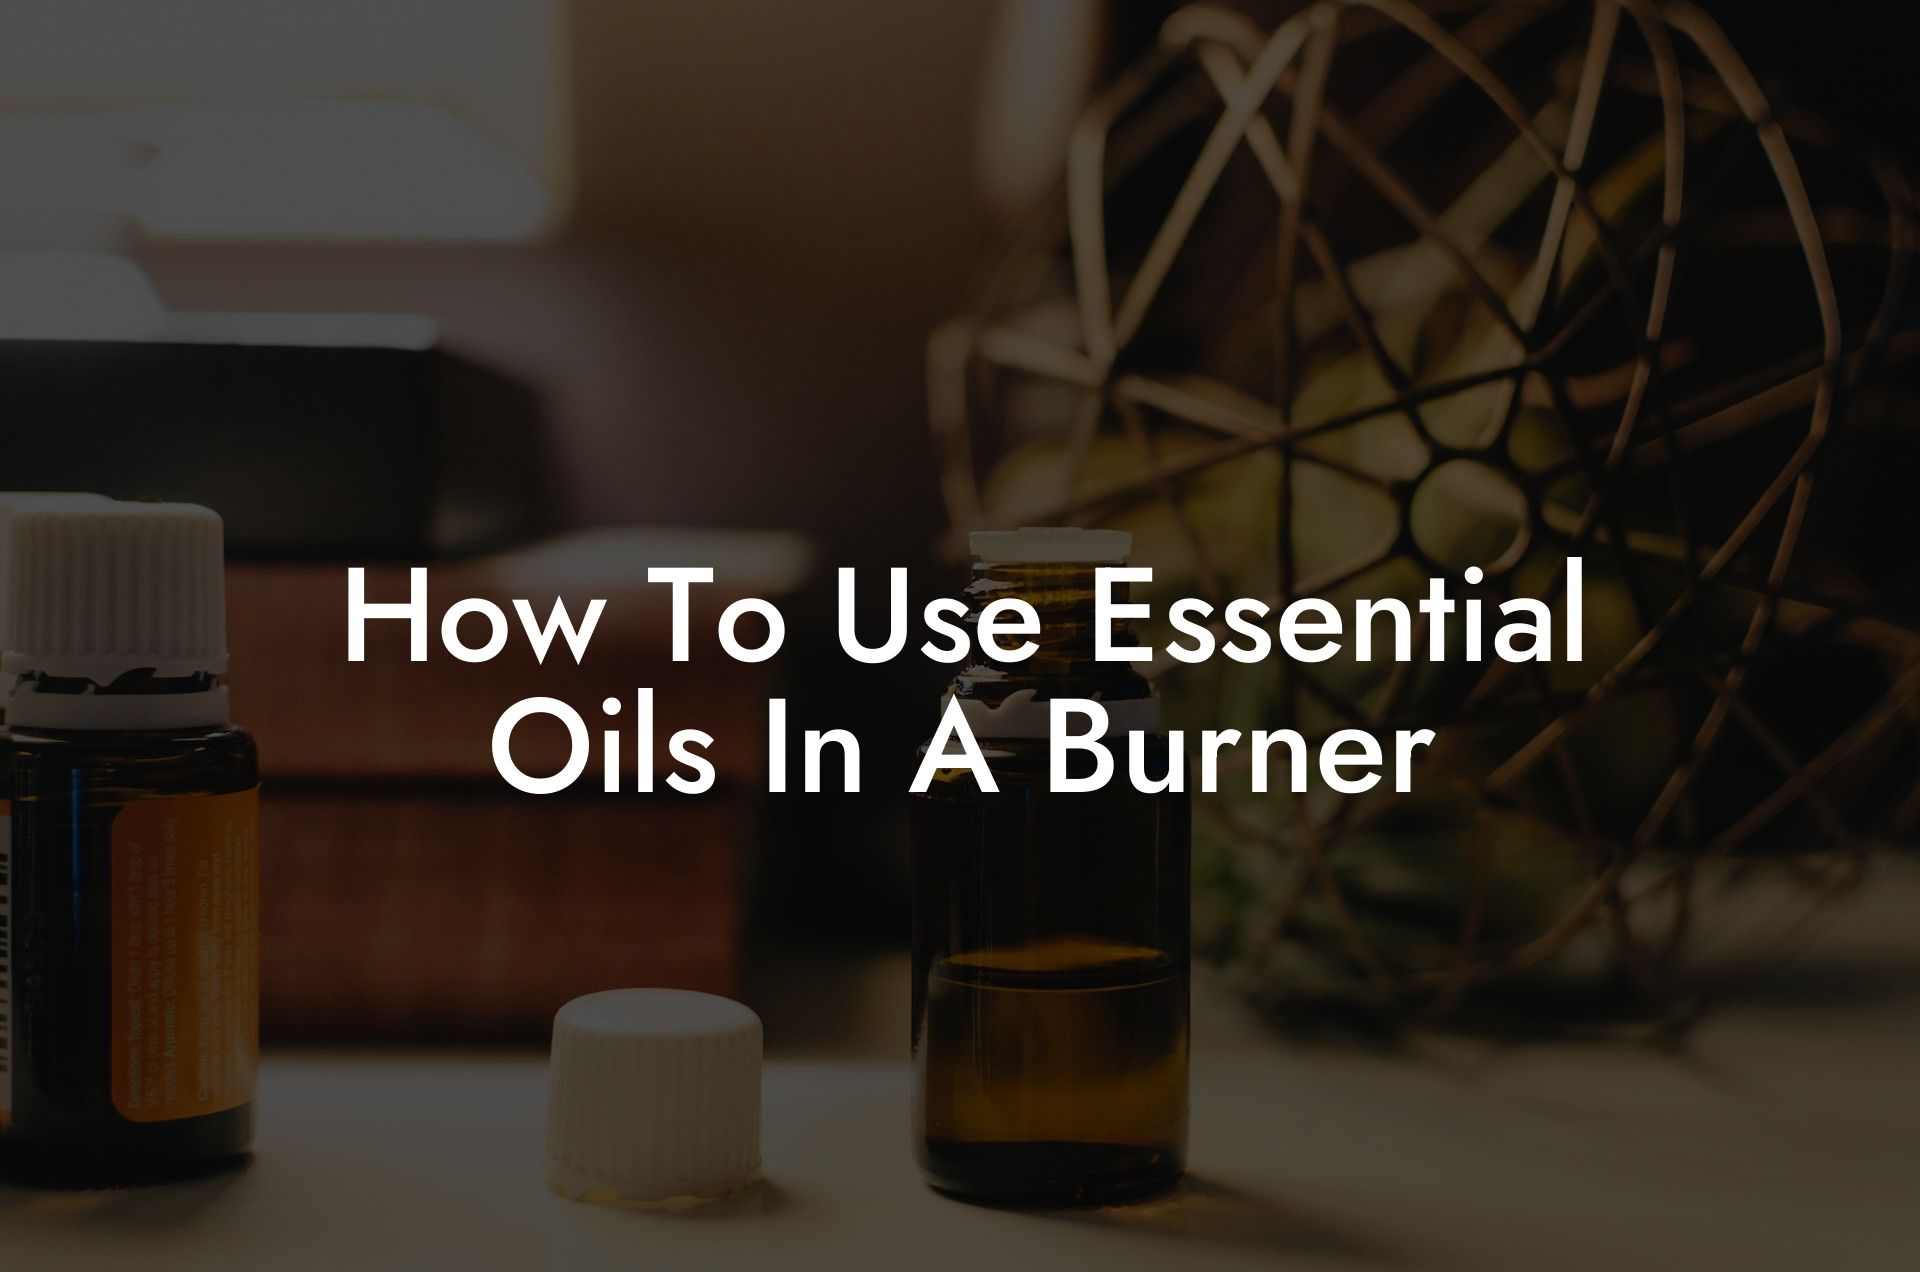 How To Use Essential Oils In A Burner